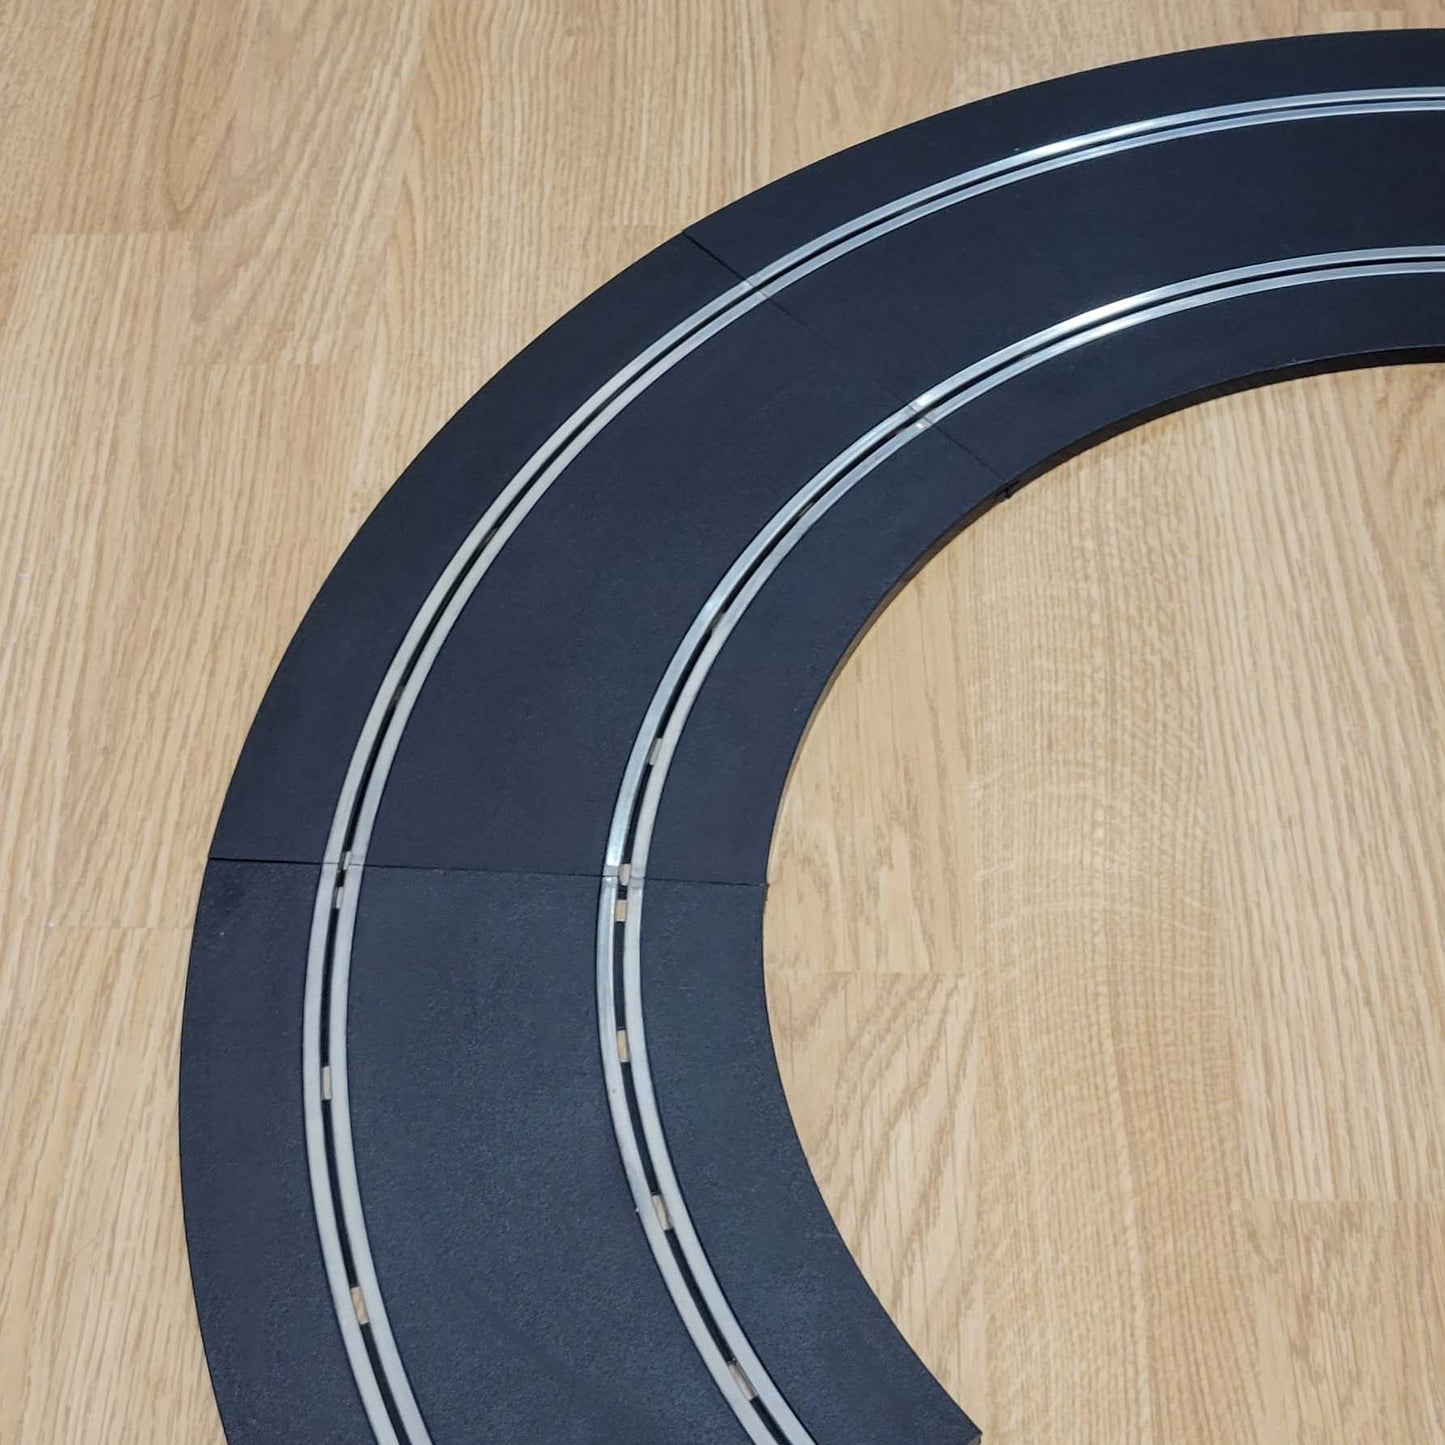 Scalextric Sport 1:32 Track Set - Layout With Bridge #AS17